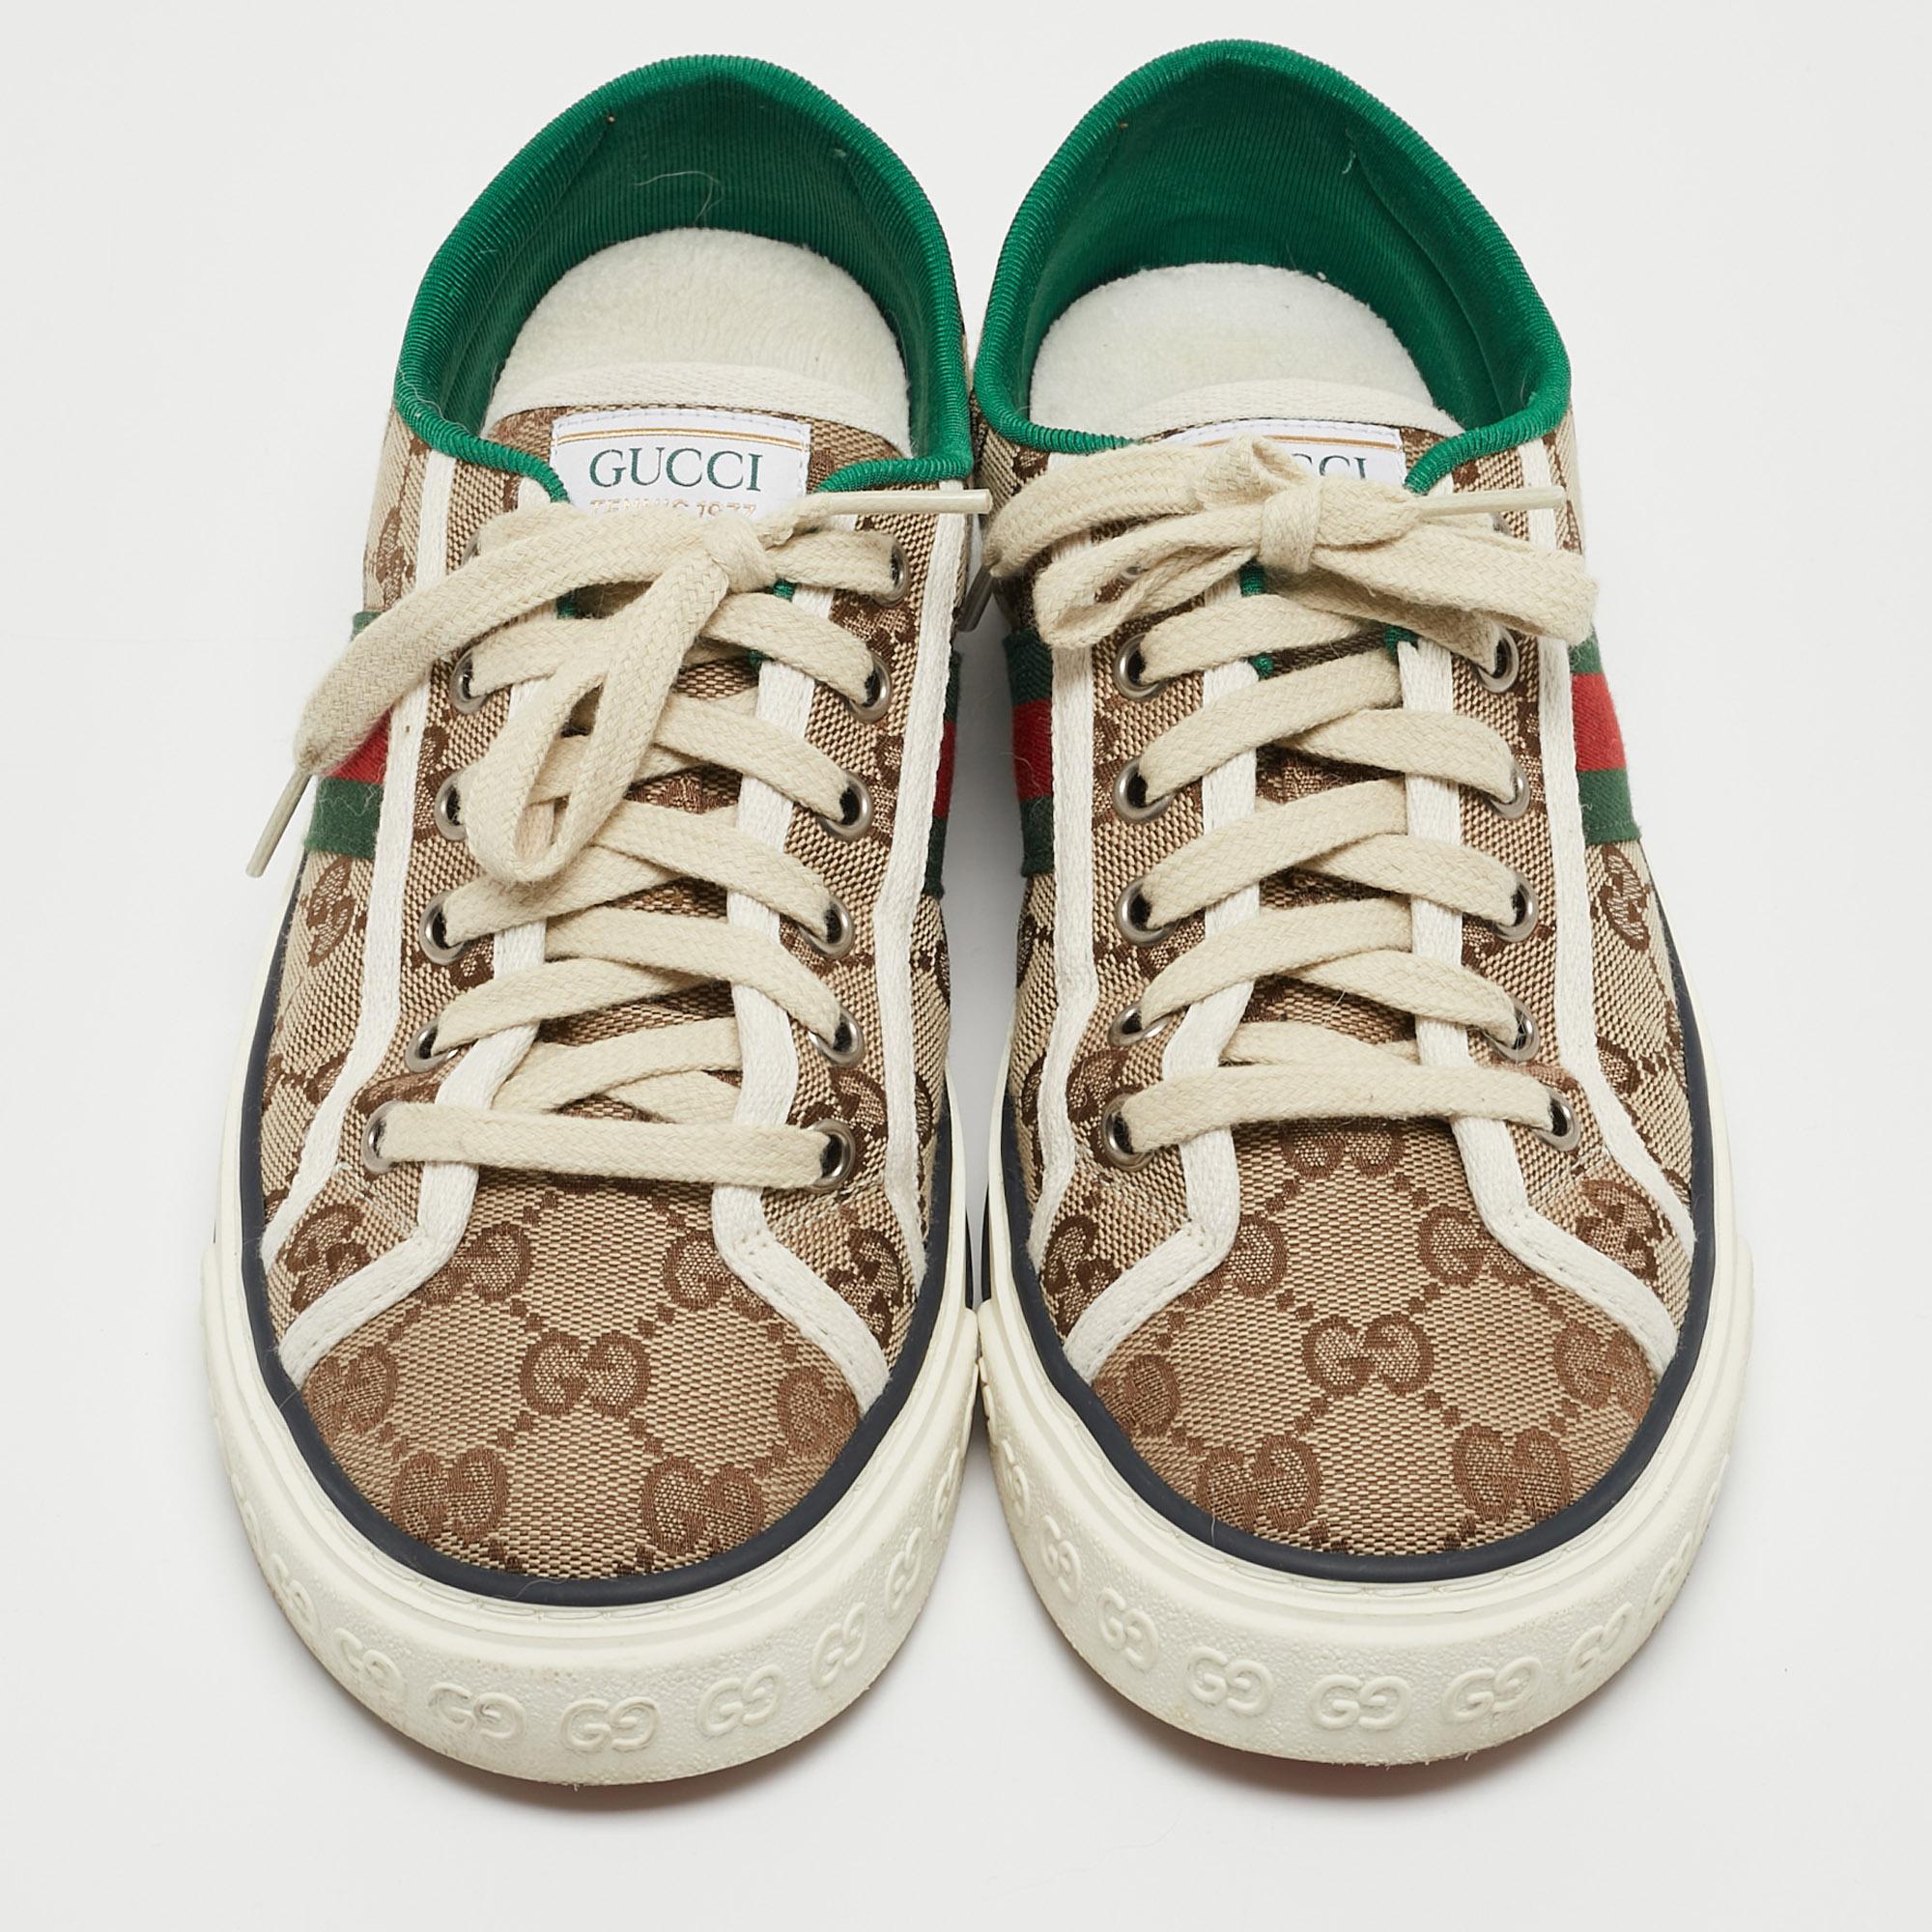 Coming in a classic silhouette, these Gucci Tennis 1977 sneakers are a seamless combination of luxury, comfort, and style. These sneakers are finished with signature details and comfortable insoles.

Includes
Original Dustbag, Original Box, Info